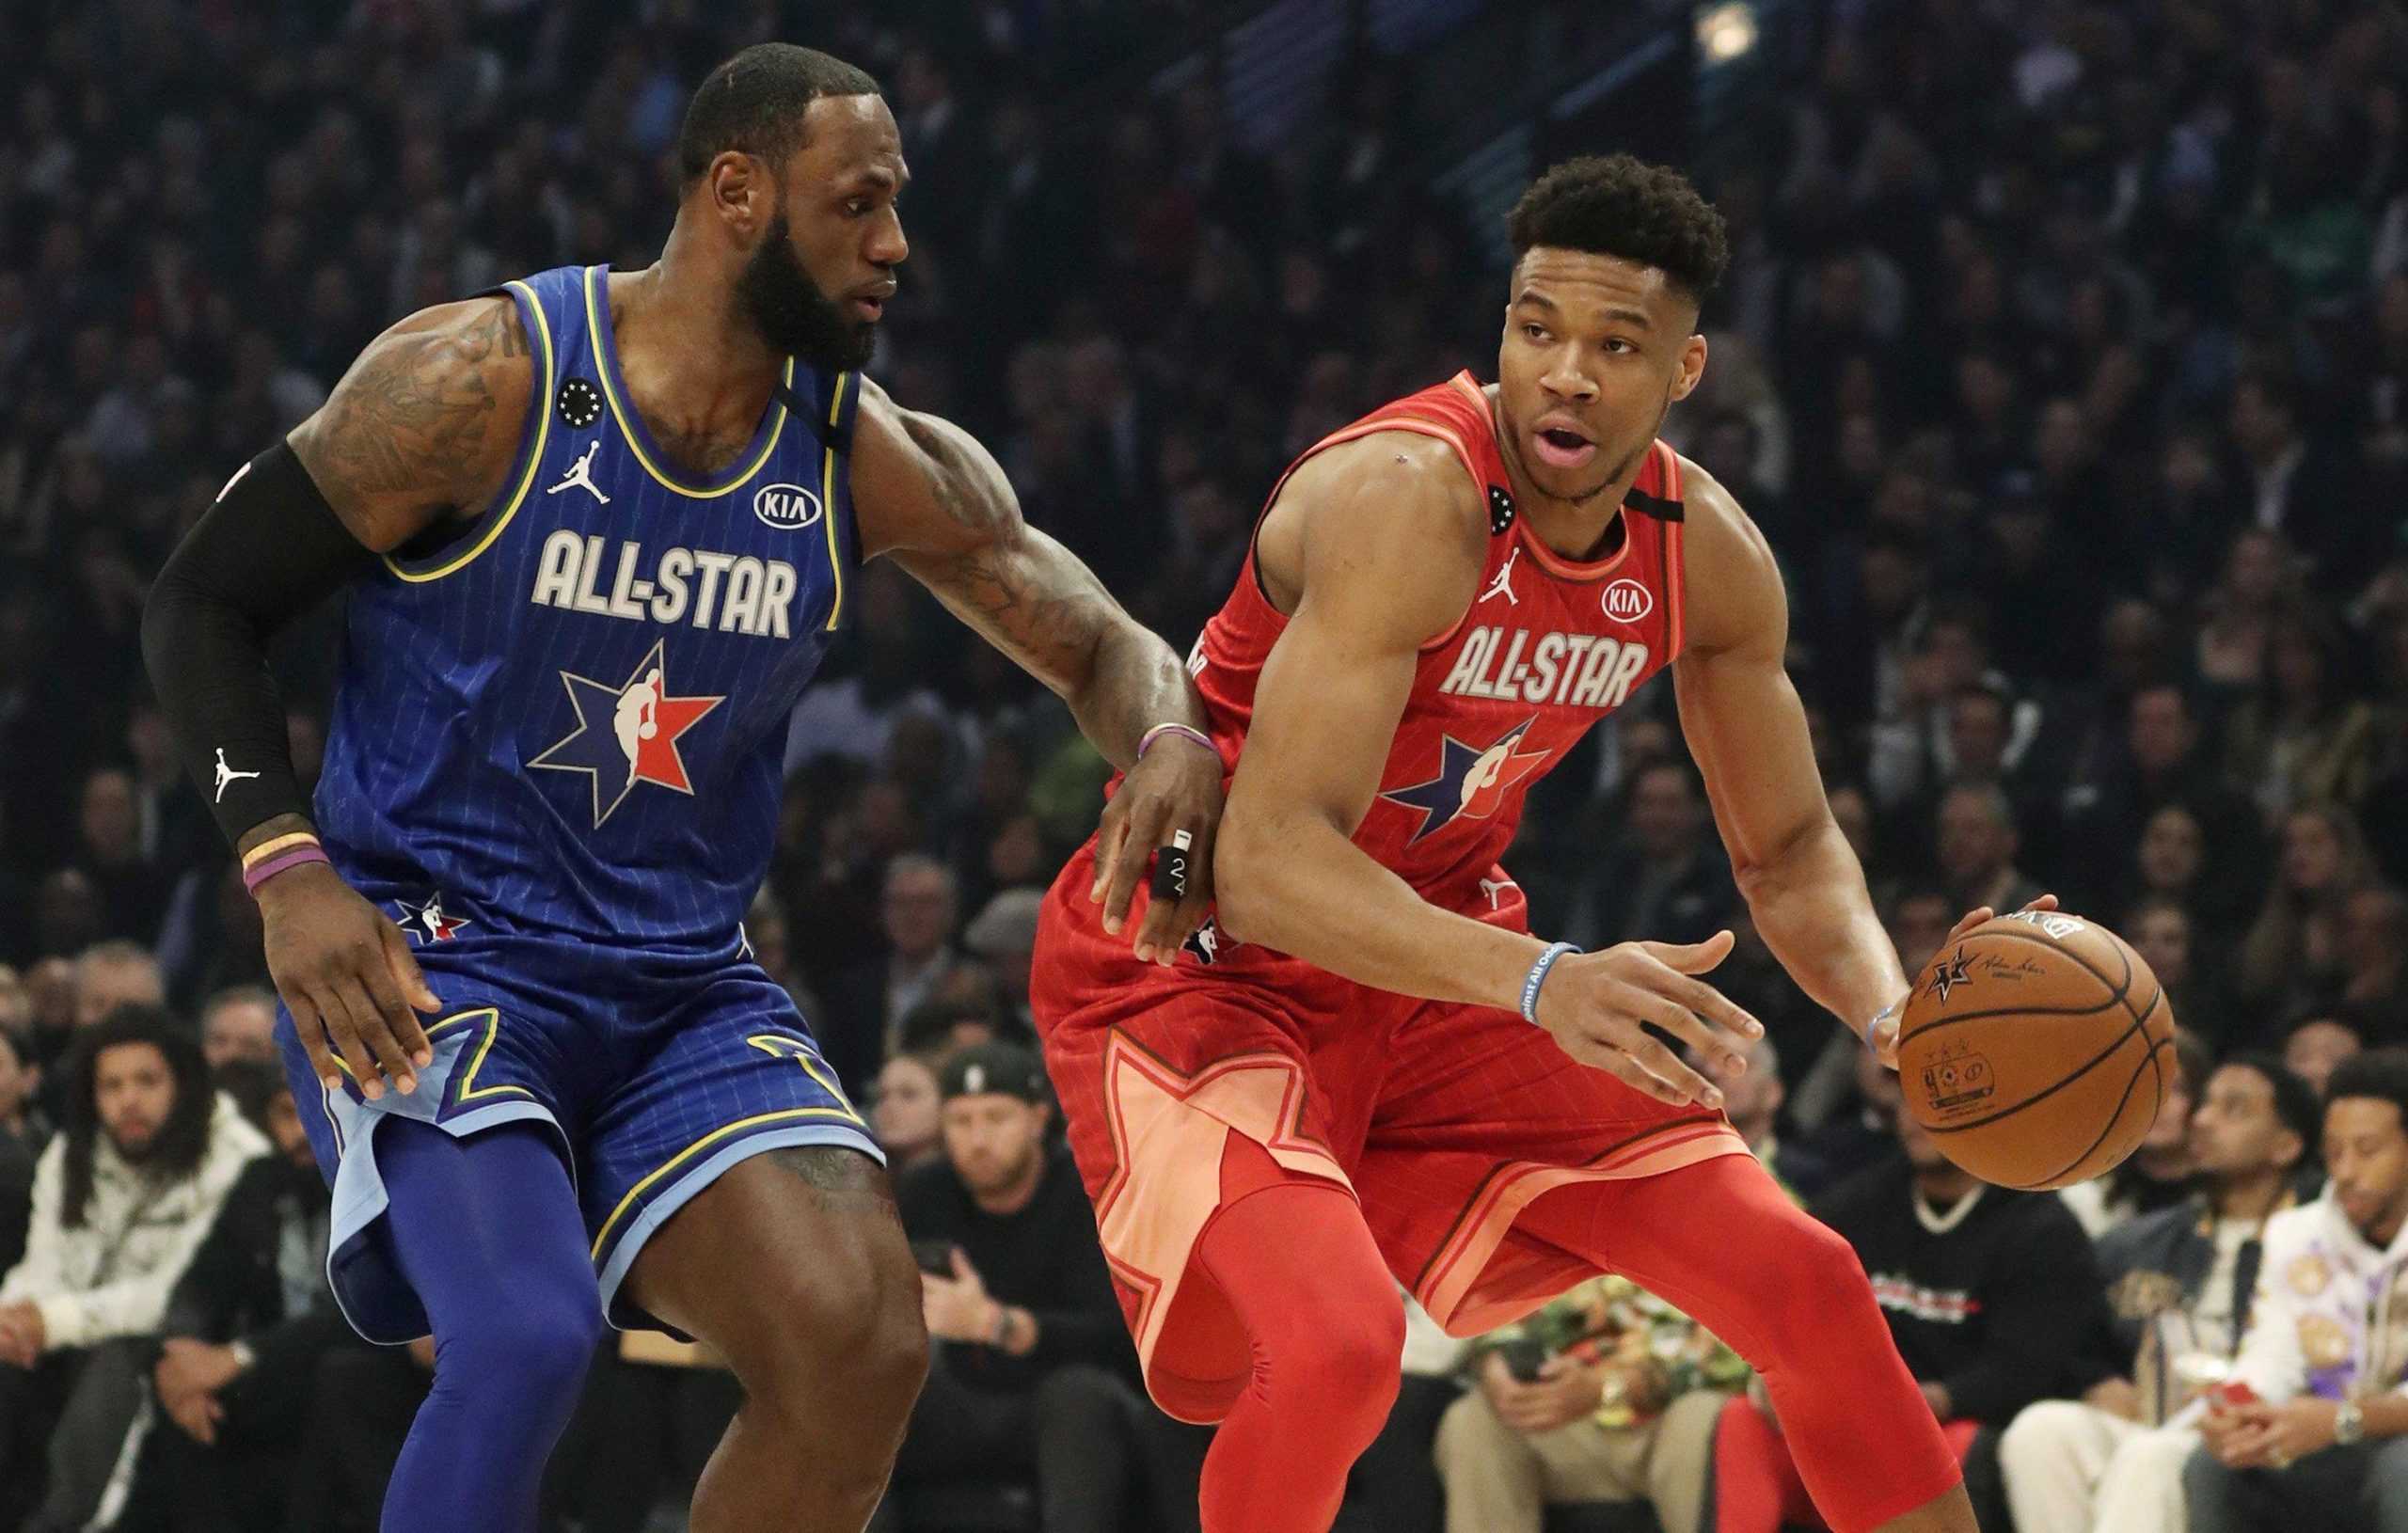 Giannis Antetokounmpo of Team Giannis dribbles past LeBron James of Team LeBron in the first quarter of the NBA All-Star Game on Sunday. [JOHN J. KIM/CHICAGO TRIBUNE]